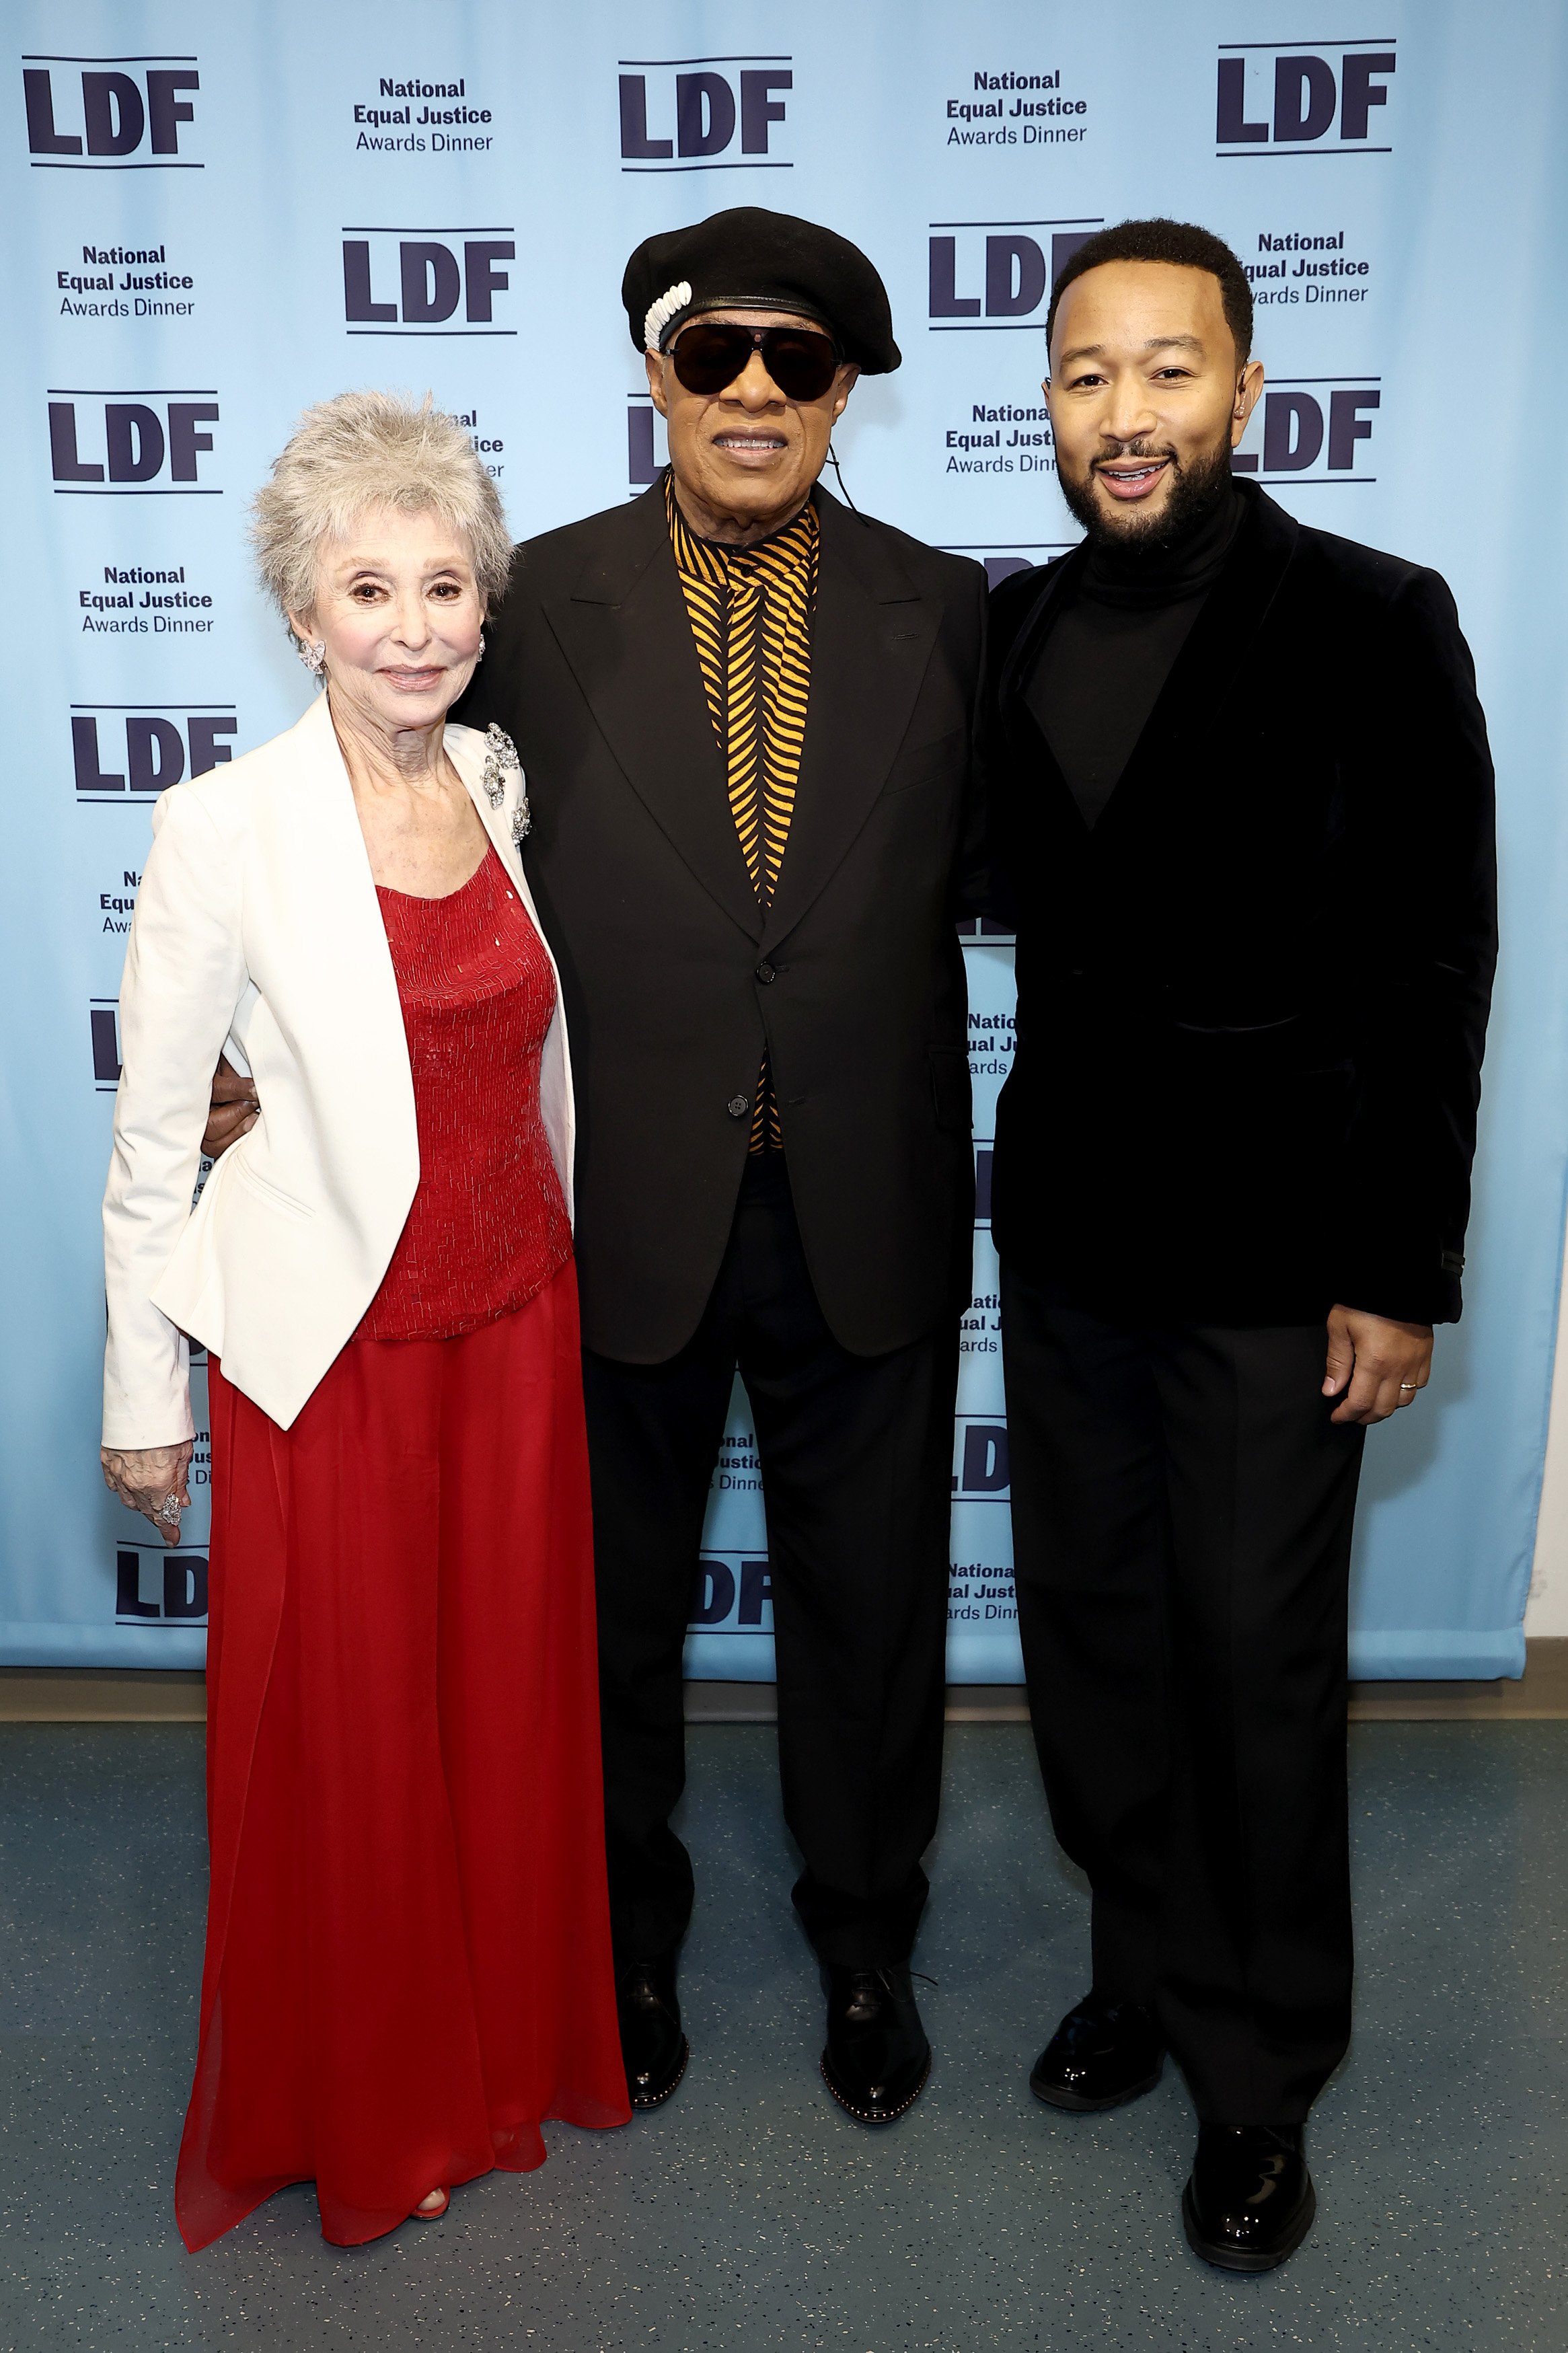 Rita Moreno, Stevie Wonder, and John Legend at the LDF 34th National Equal Justice Awards Dinner on May 10, 2022 | Source: Getty Images